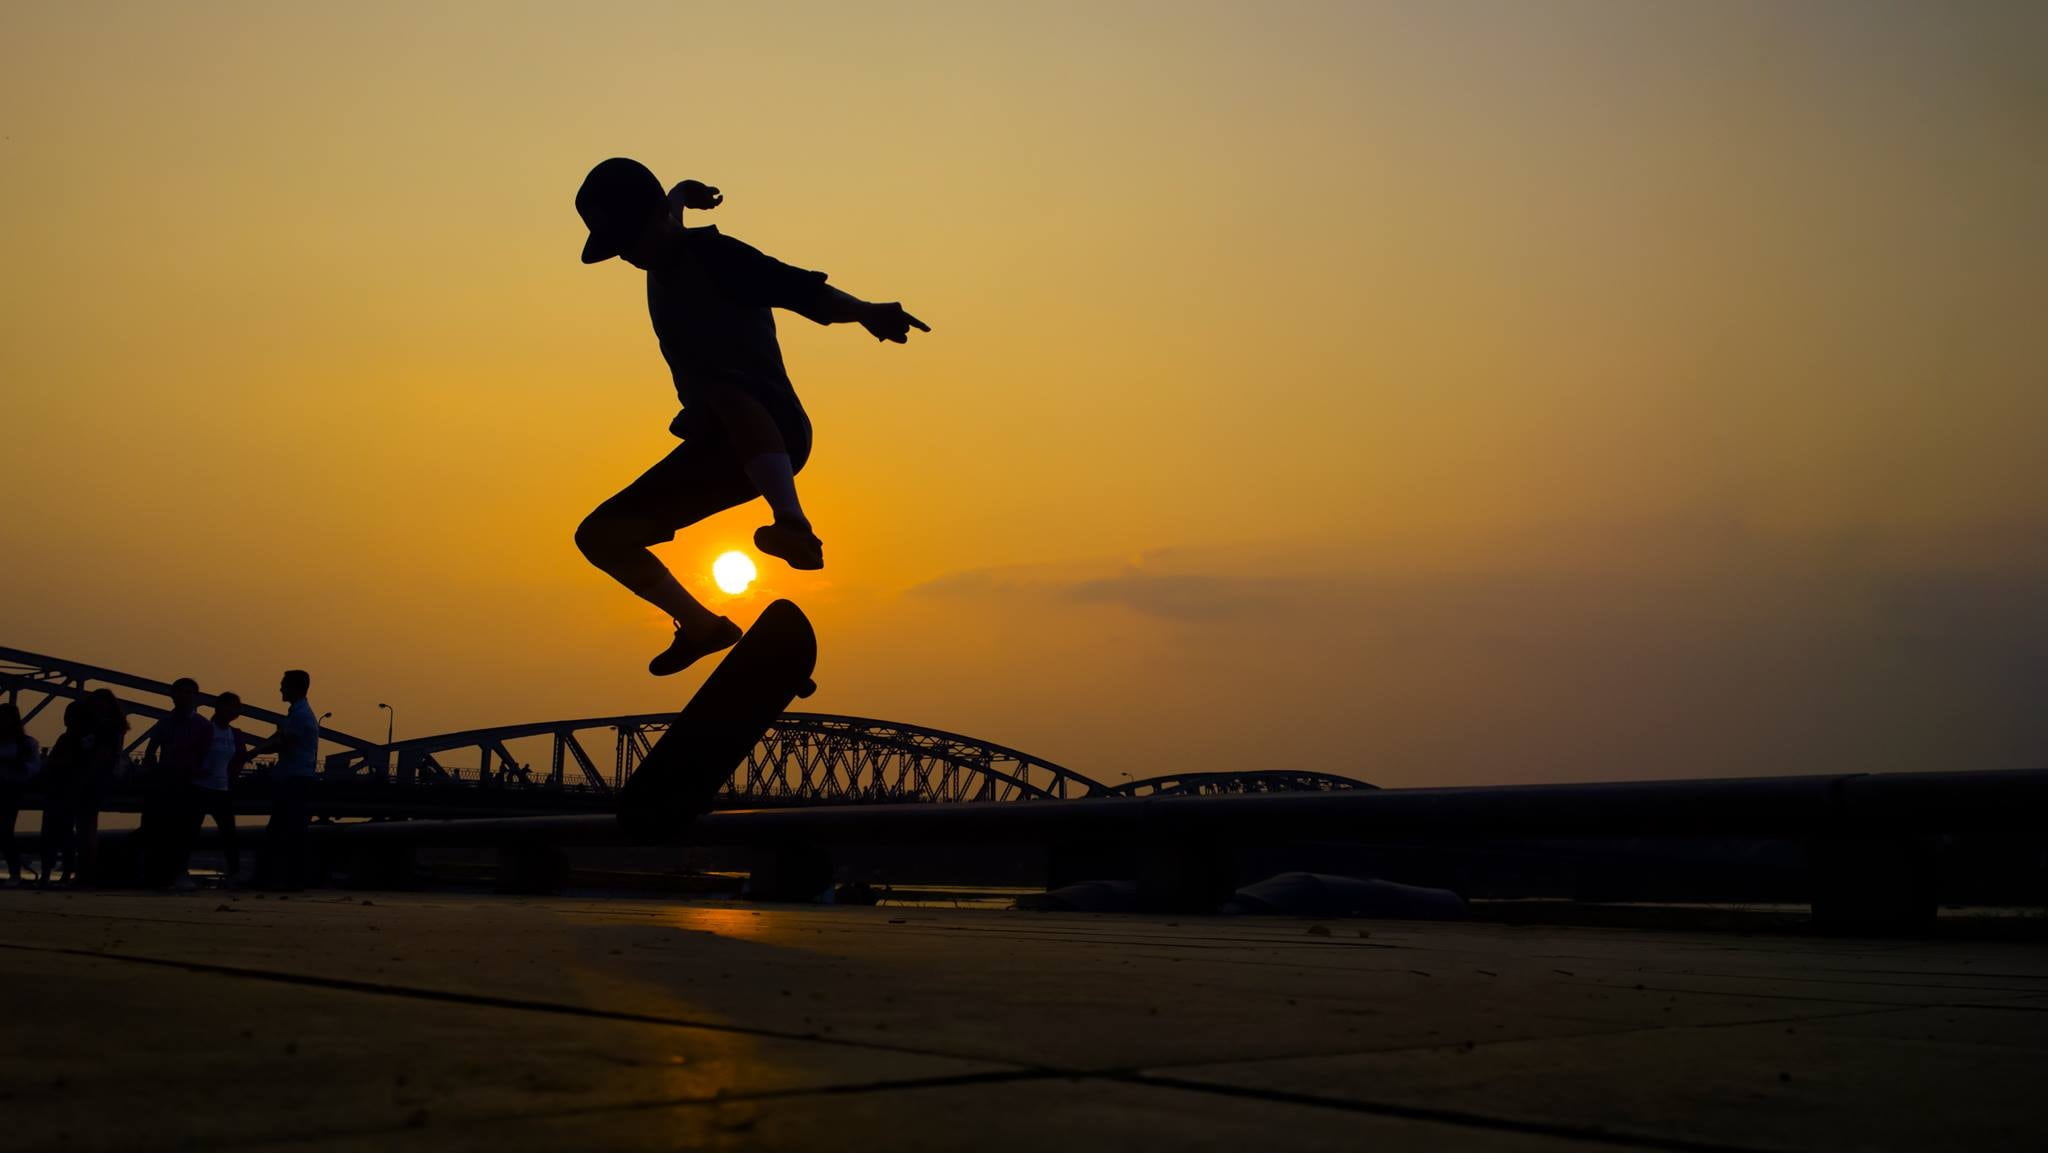 silhouette photo of person skating during golden hour, youth